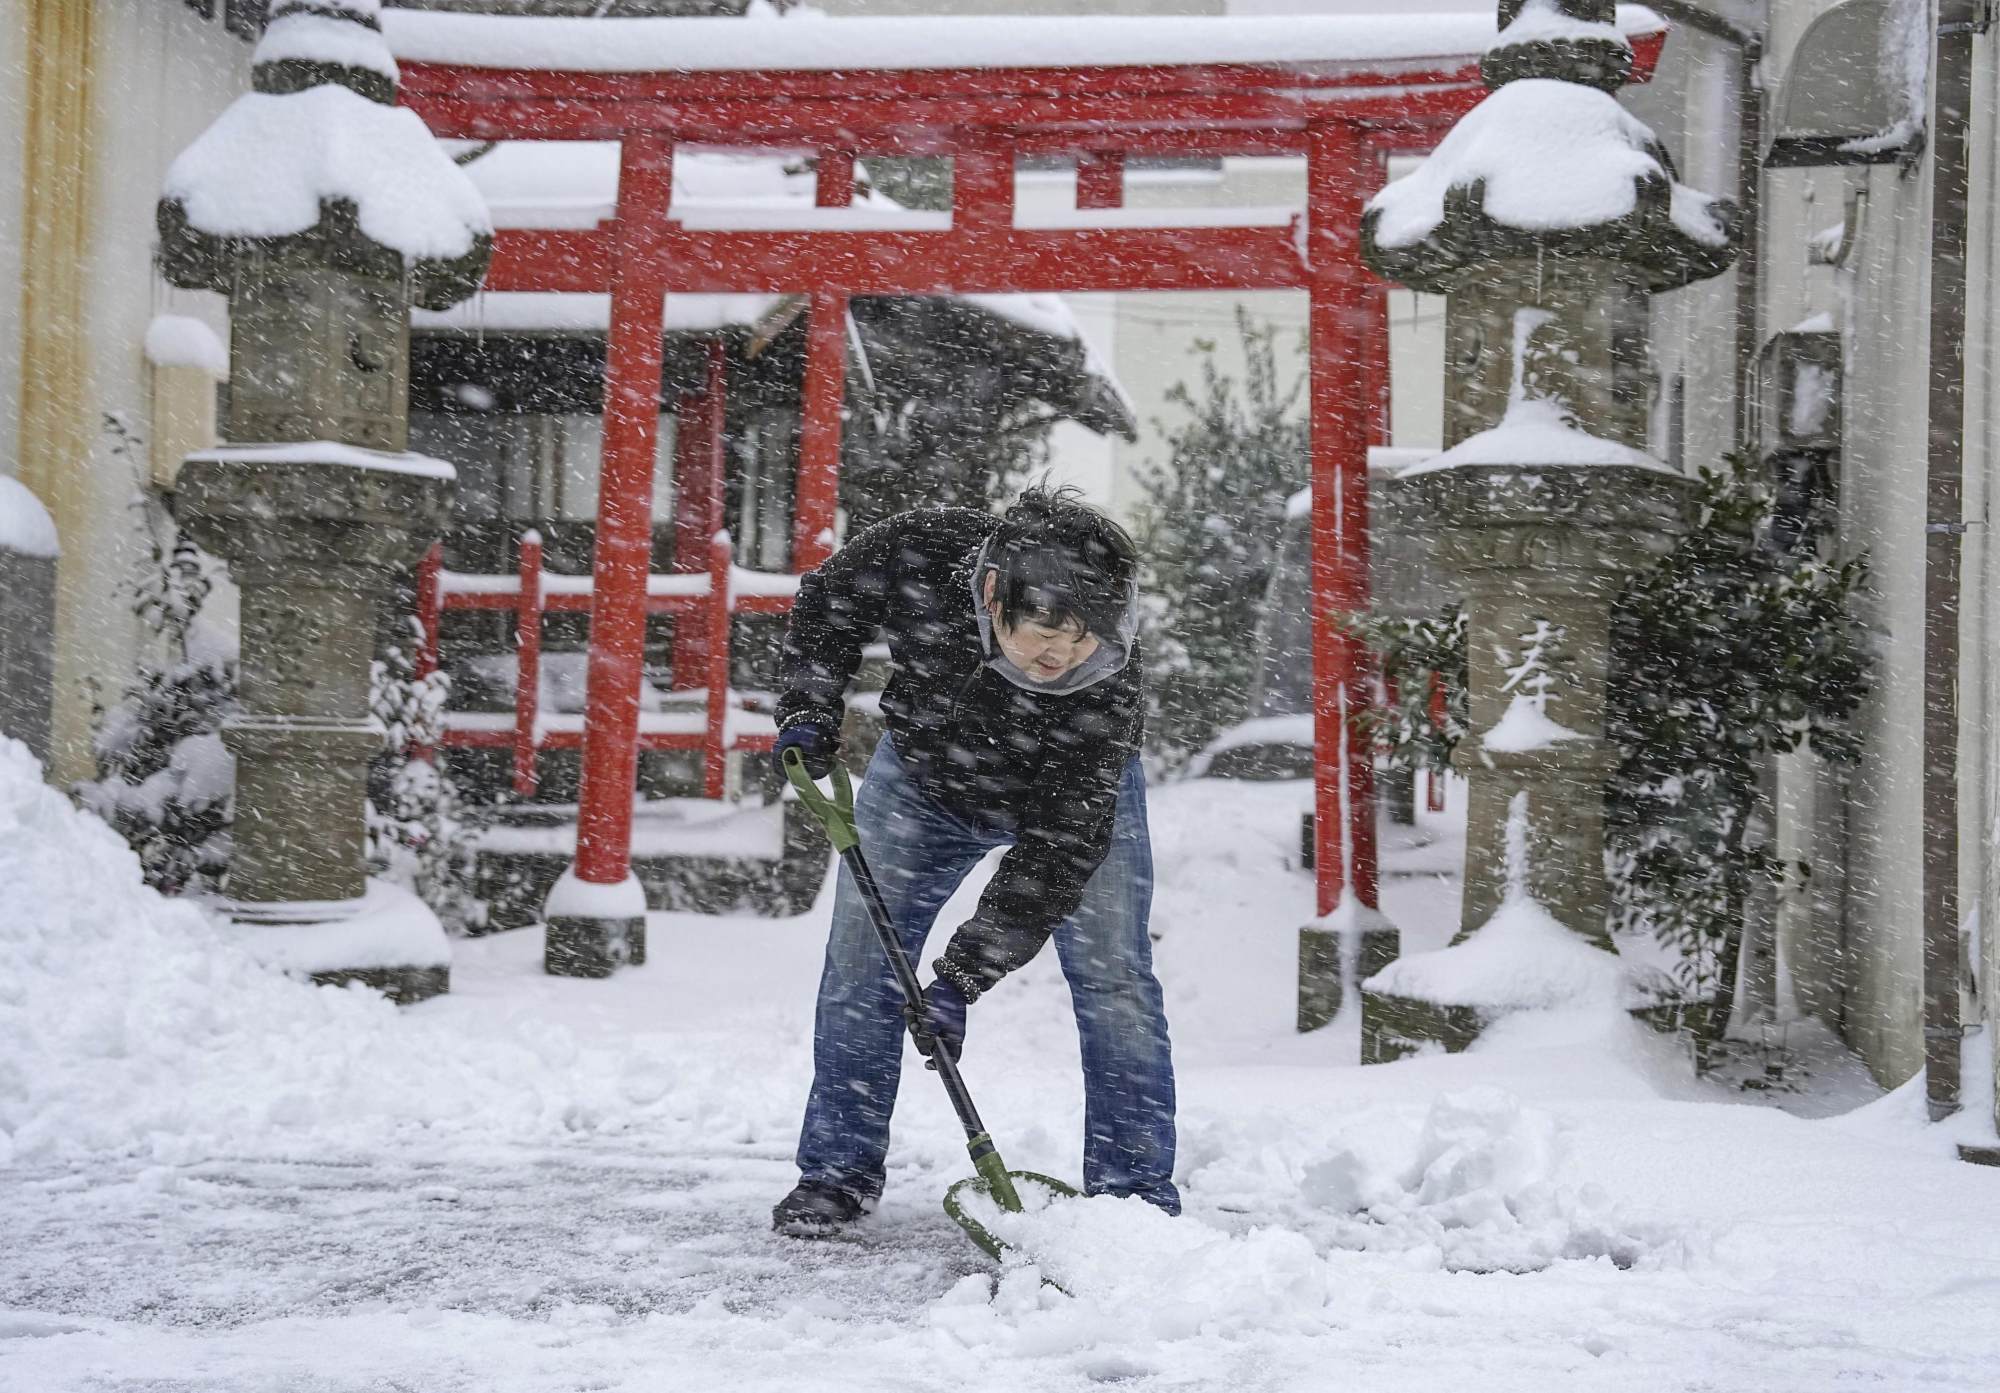 Allure of Japan's powder snow a growing danger as more tourists ski  backcountry